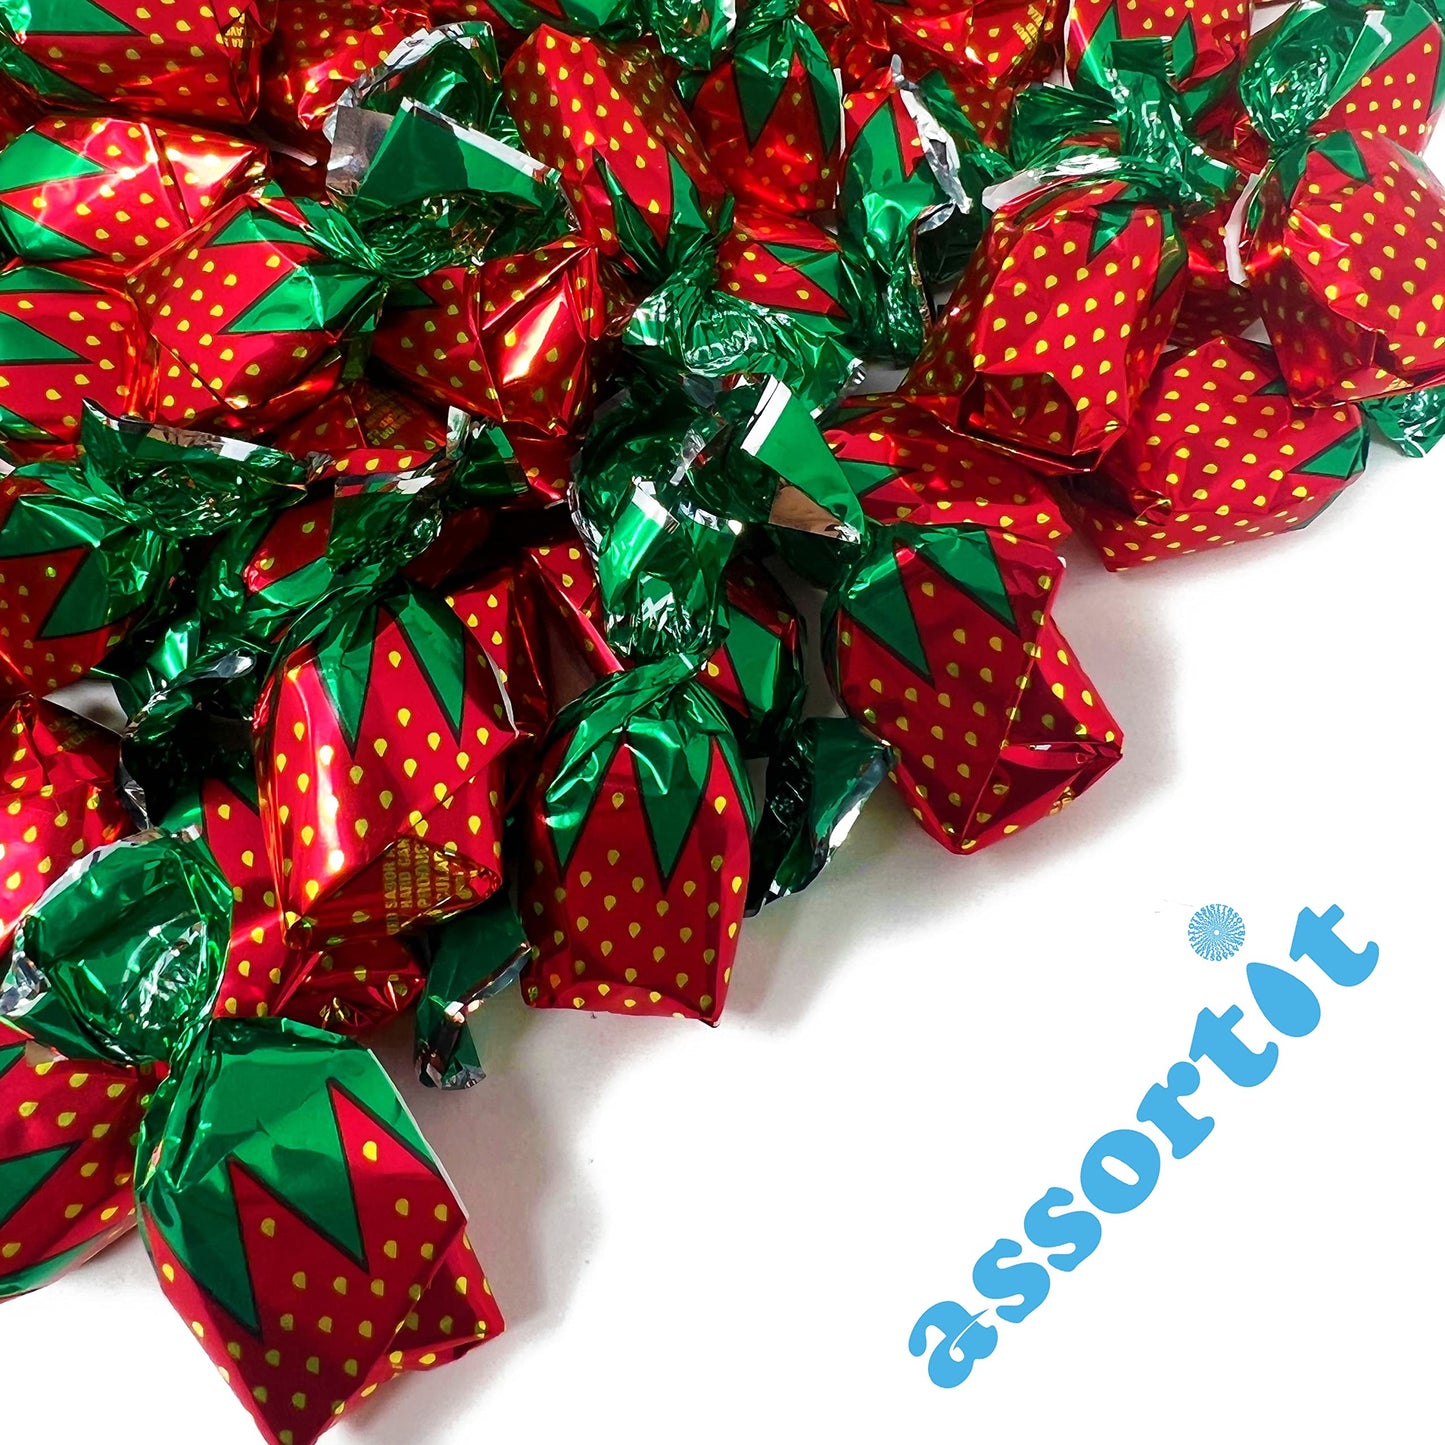 Arcor Strawberry Hard Candy - 10 lbs - Strawberry Filled With Real Strawberry Pulp Bulk 160 oz.